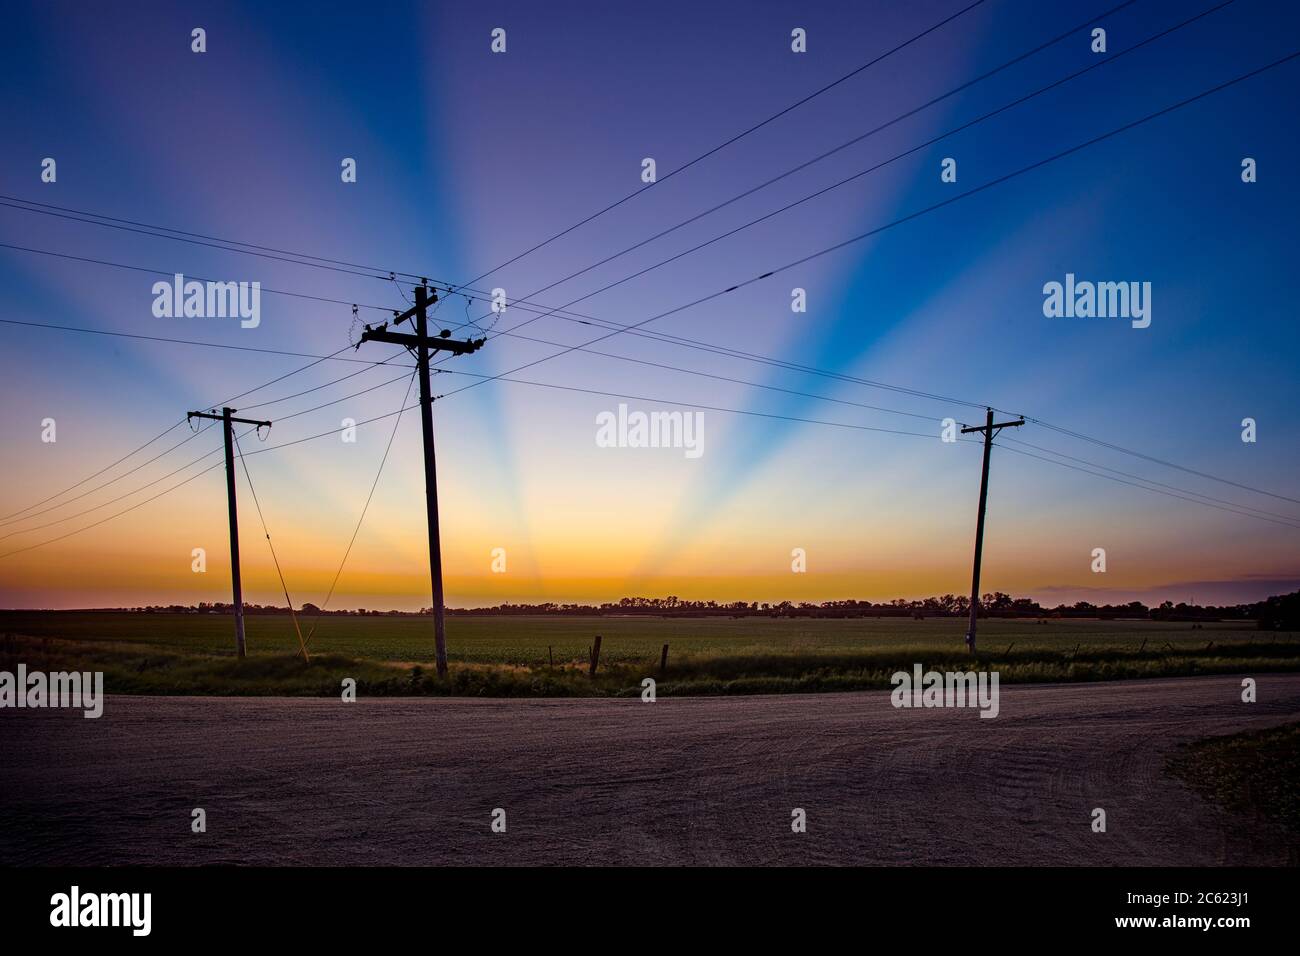 Colorful beams of light at sunset with three utility poles - a modern day Calgary Stock Photo